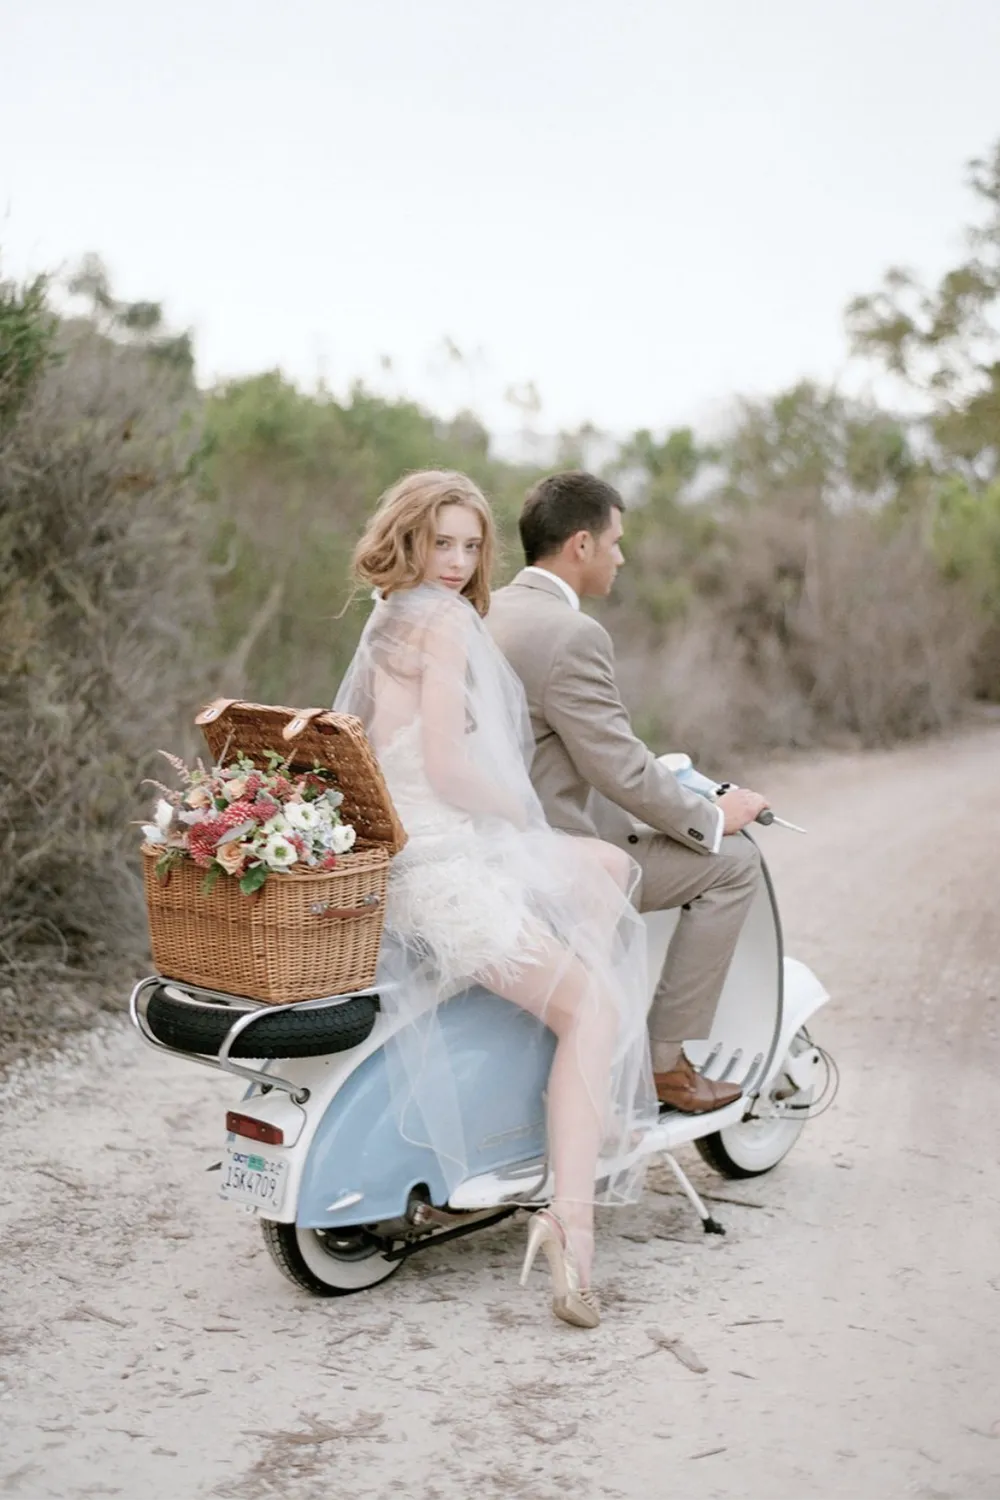 A whimsical escape captured by Elizabeth Messina, an elite name in the Top Wedding Photographers of 2024, featuring a bride and groom on a classic scooter with a wicker basket full of flowers, set against a soft, natural backdrop, exuding a vintage romance.